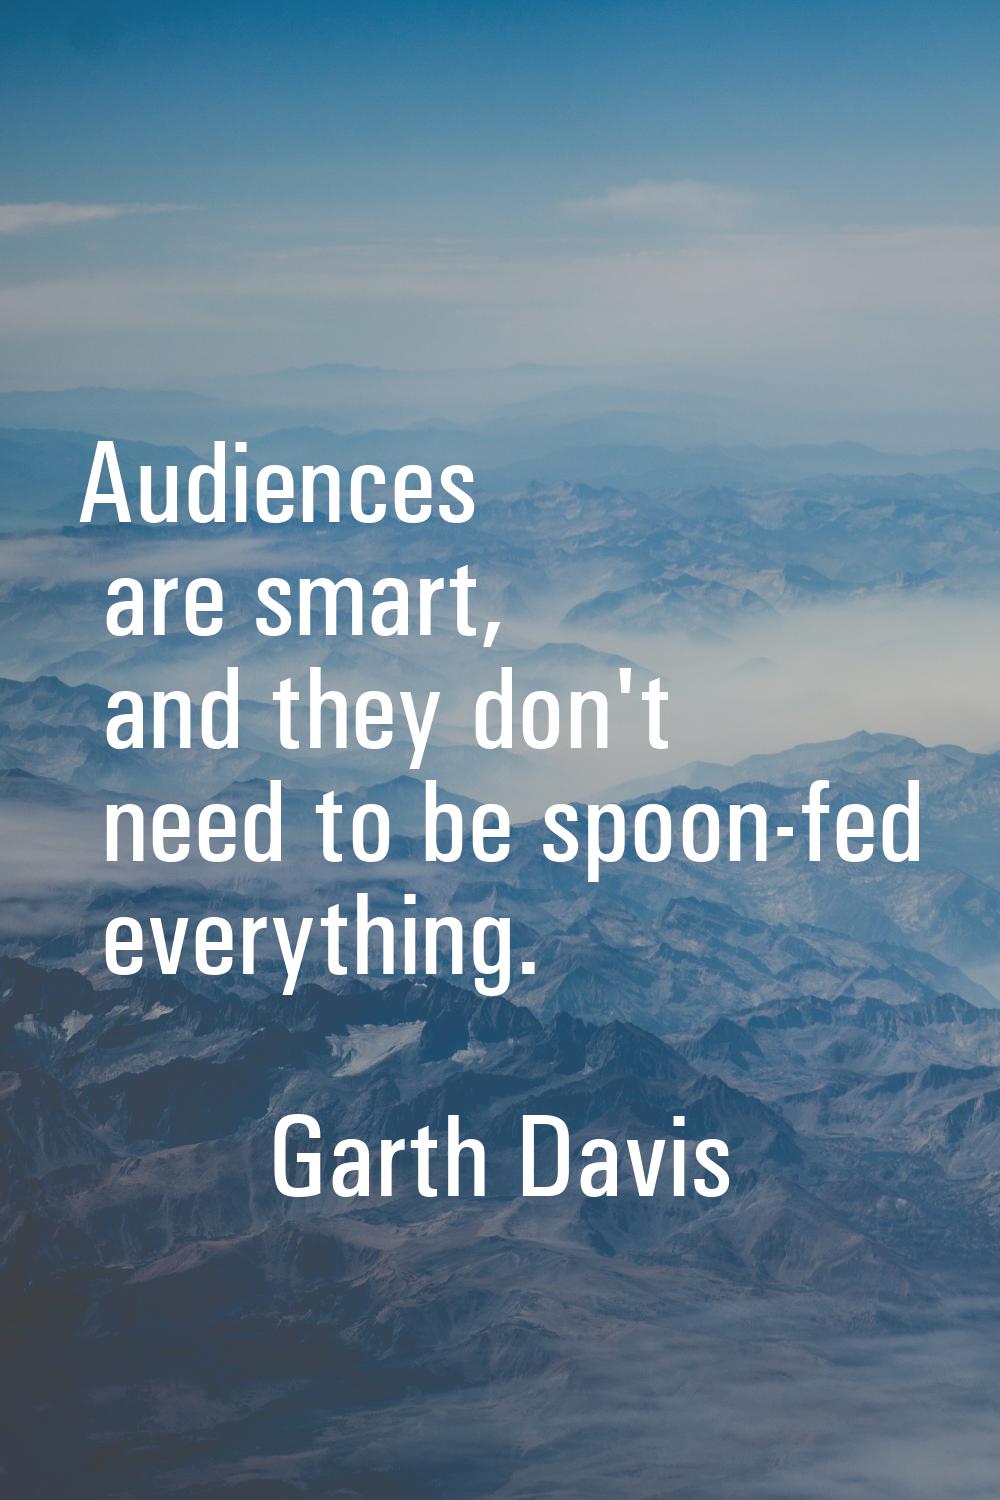 Audiences are smart, and they don't need to be spoon-fed everything.